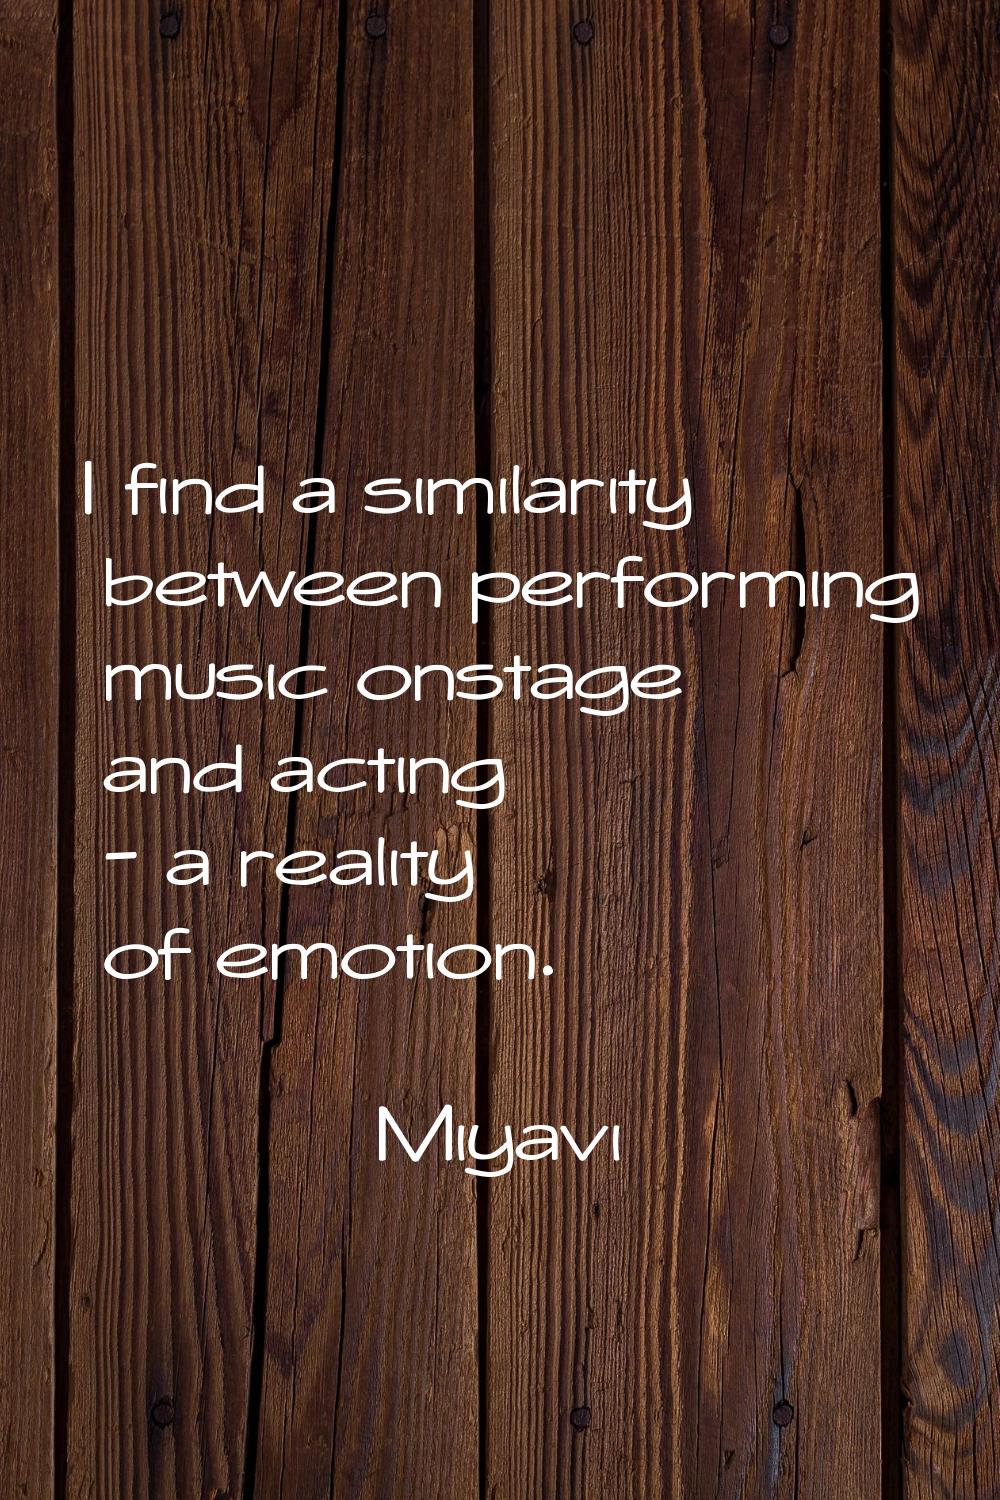 I find a similarity between performing music onstage and acting - a reality of emotion.